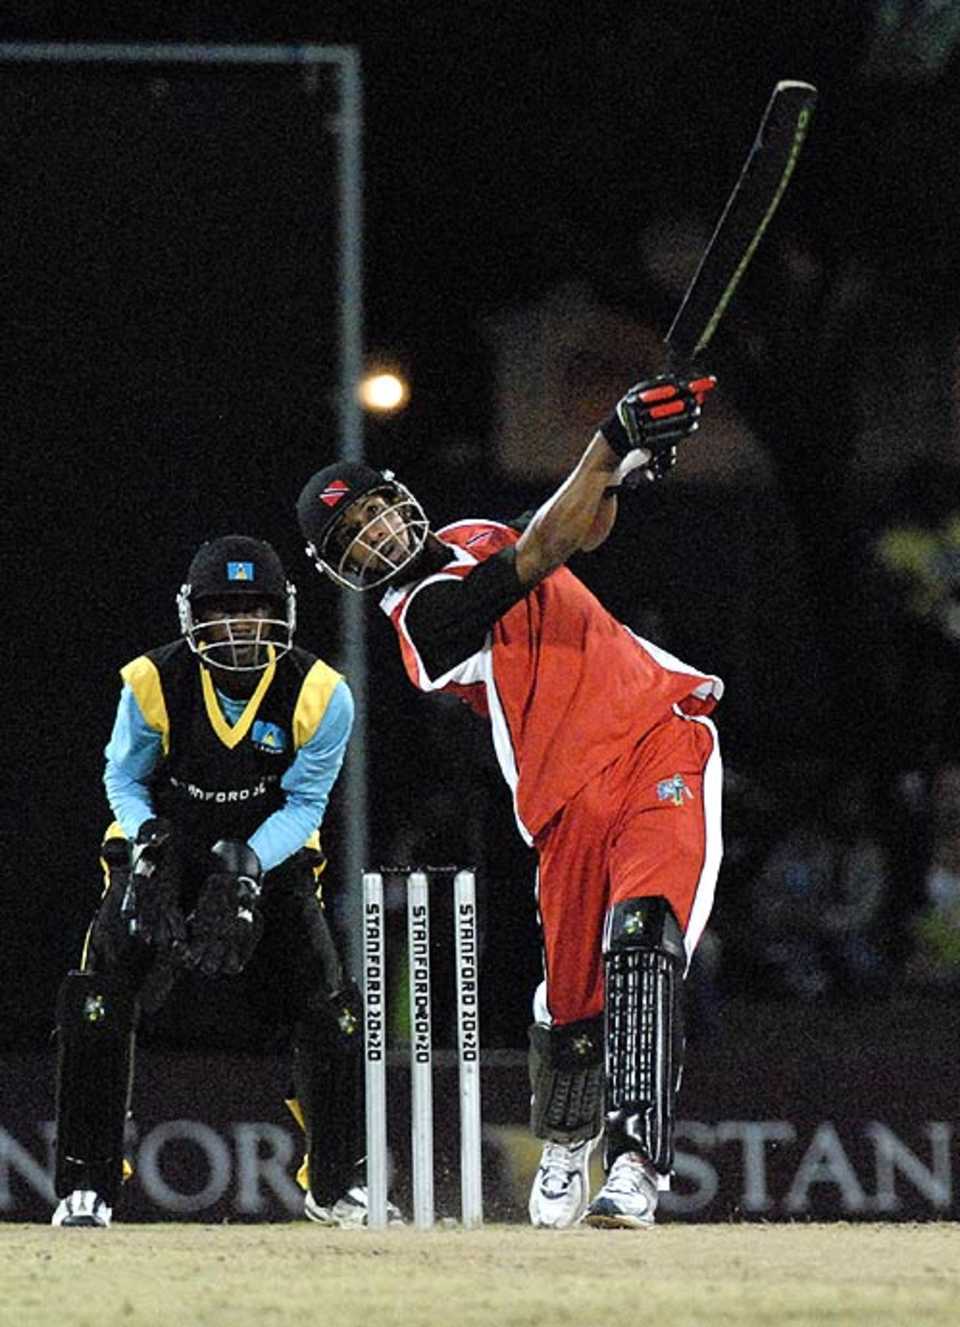 Lendl Simmons goes downtown, St Lucia v Trinidad & Tobago, 7th match, Stanford 20/20, Antigua, February 2, 2008